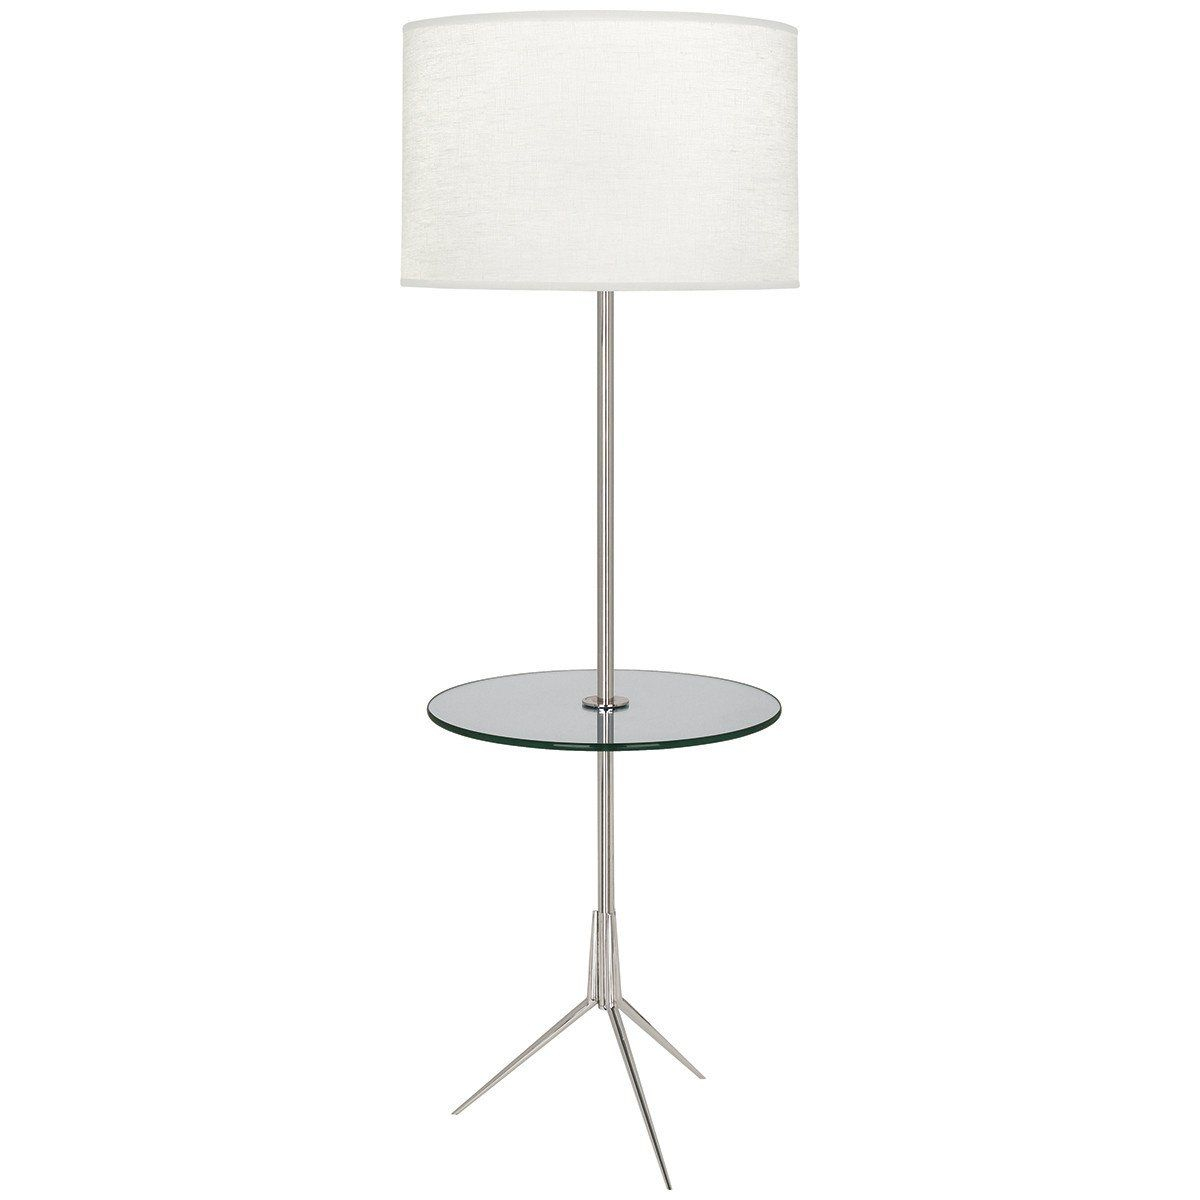 Robert Abbey Martin Glass Tray Table Floor Lamp Floor Lamp intended for size 1200 X 1200